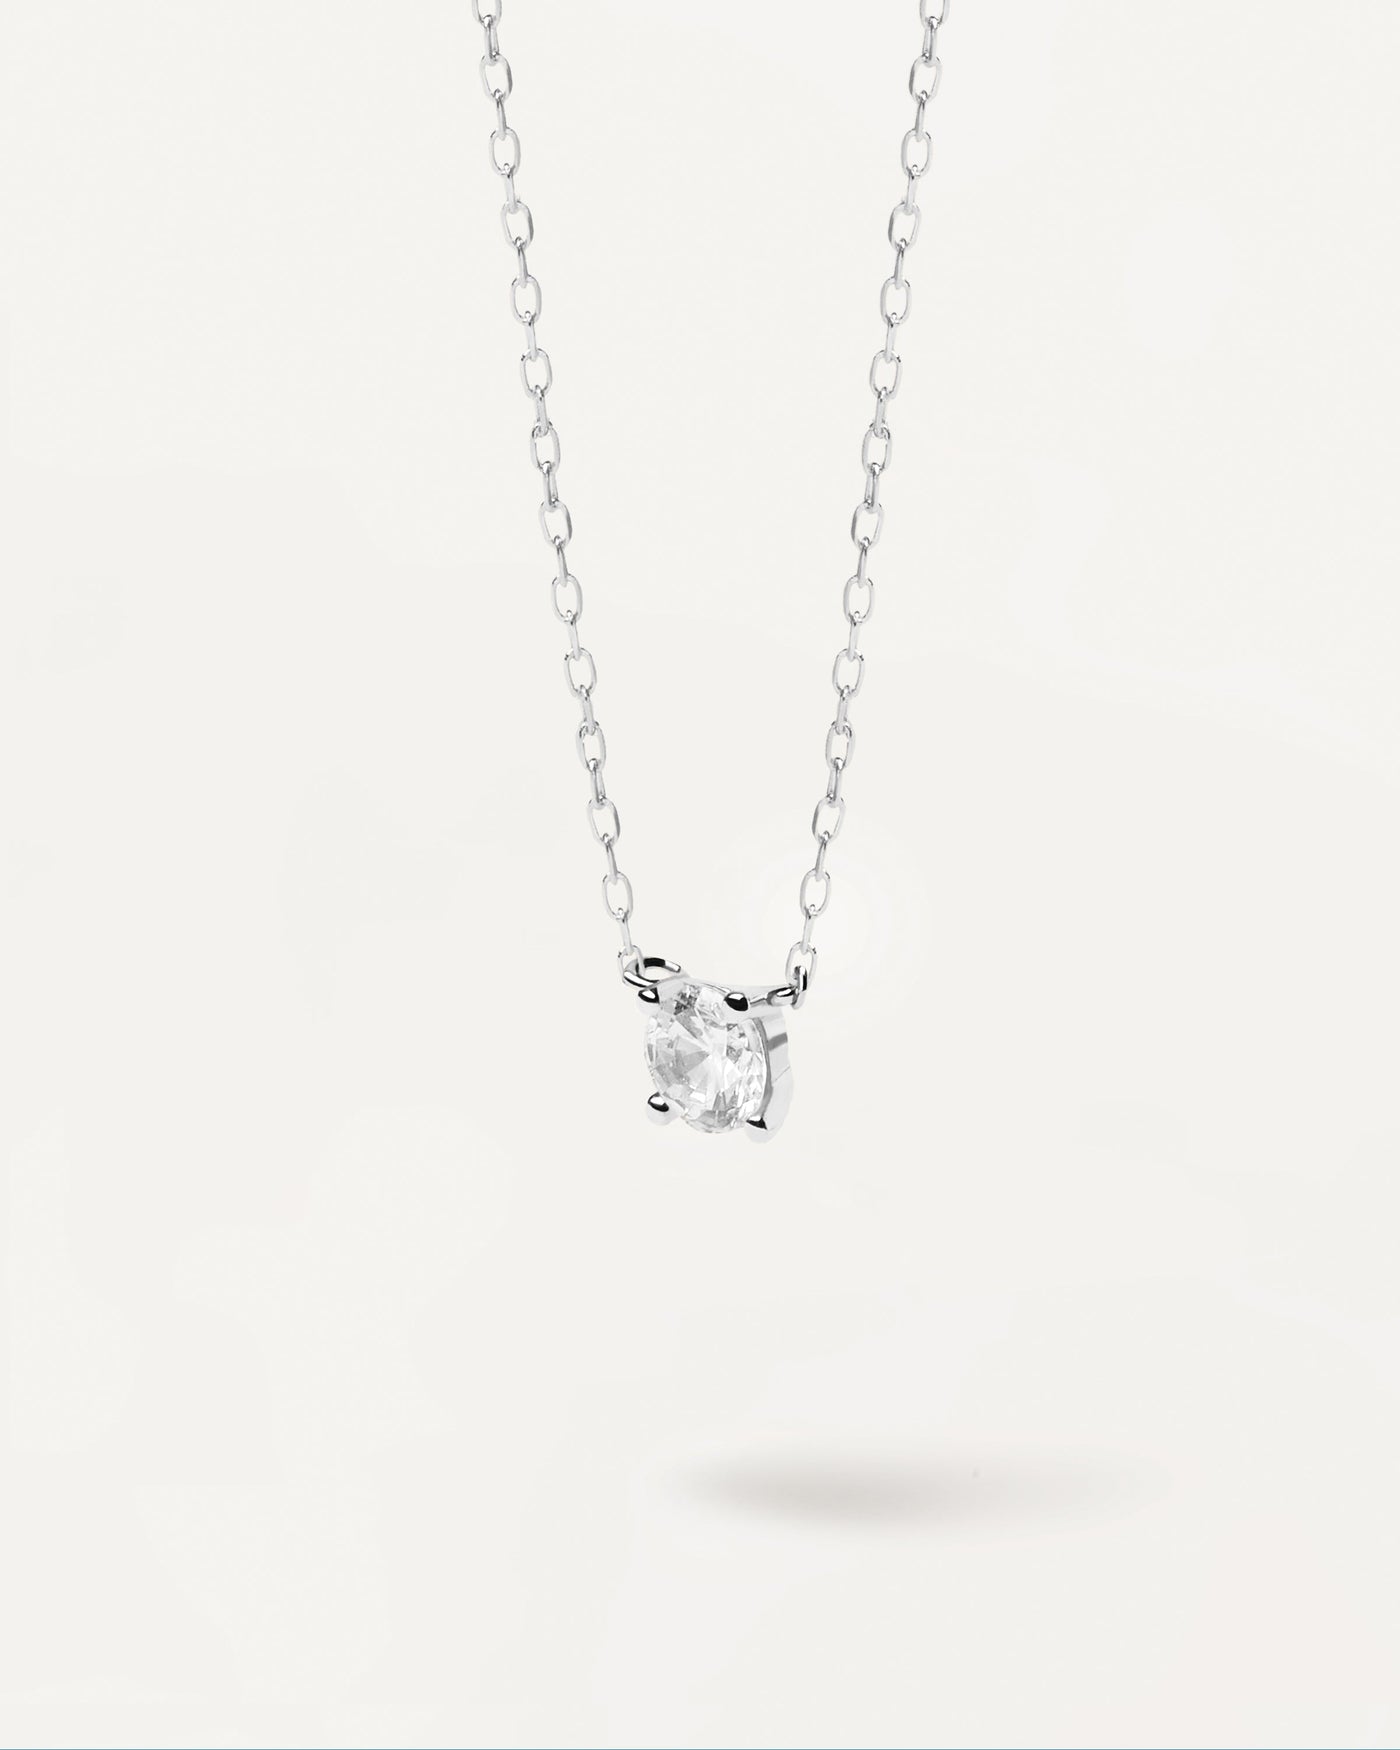 2023 Selection | Diamonds and White Gold Solitaire Medium Necklace. Solid white gold chain necklace with fine round lab-grown diamond of 0.20 carats. Get the latest arrival from PDPAOLA. Place your order safely and get this Best Seller. Free Shipping.